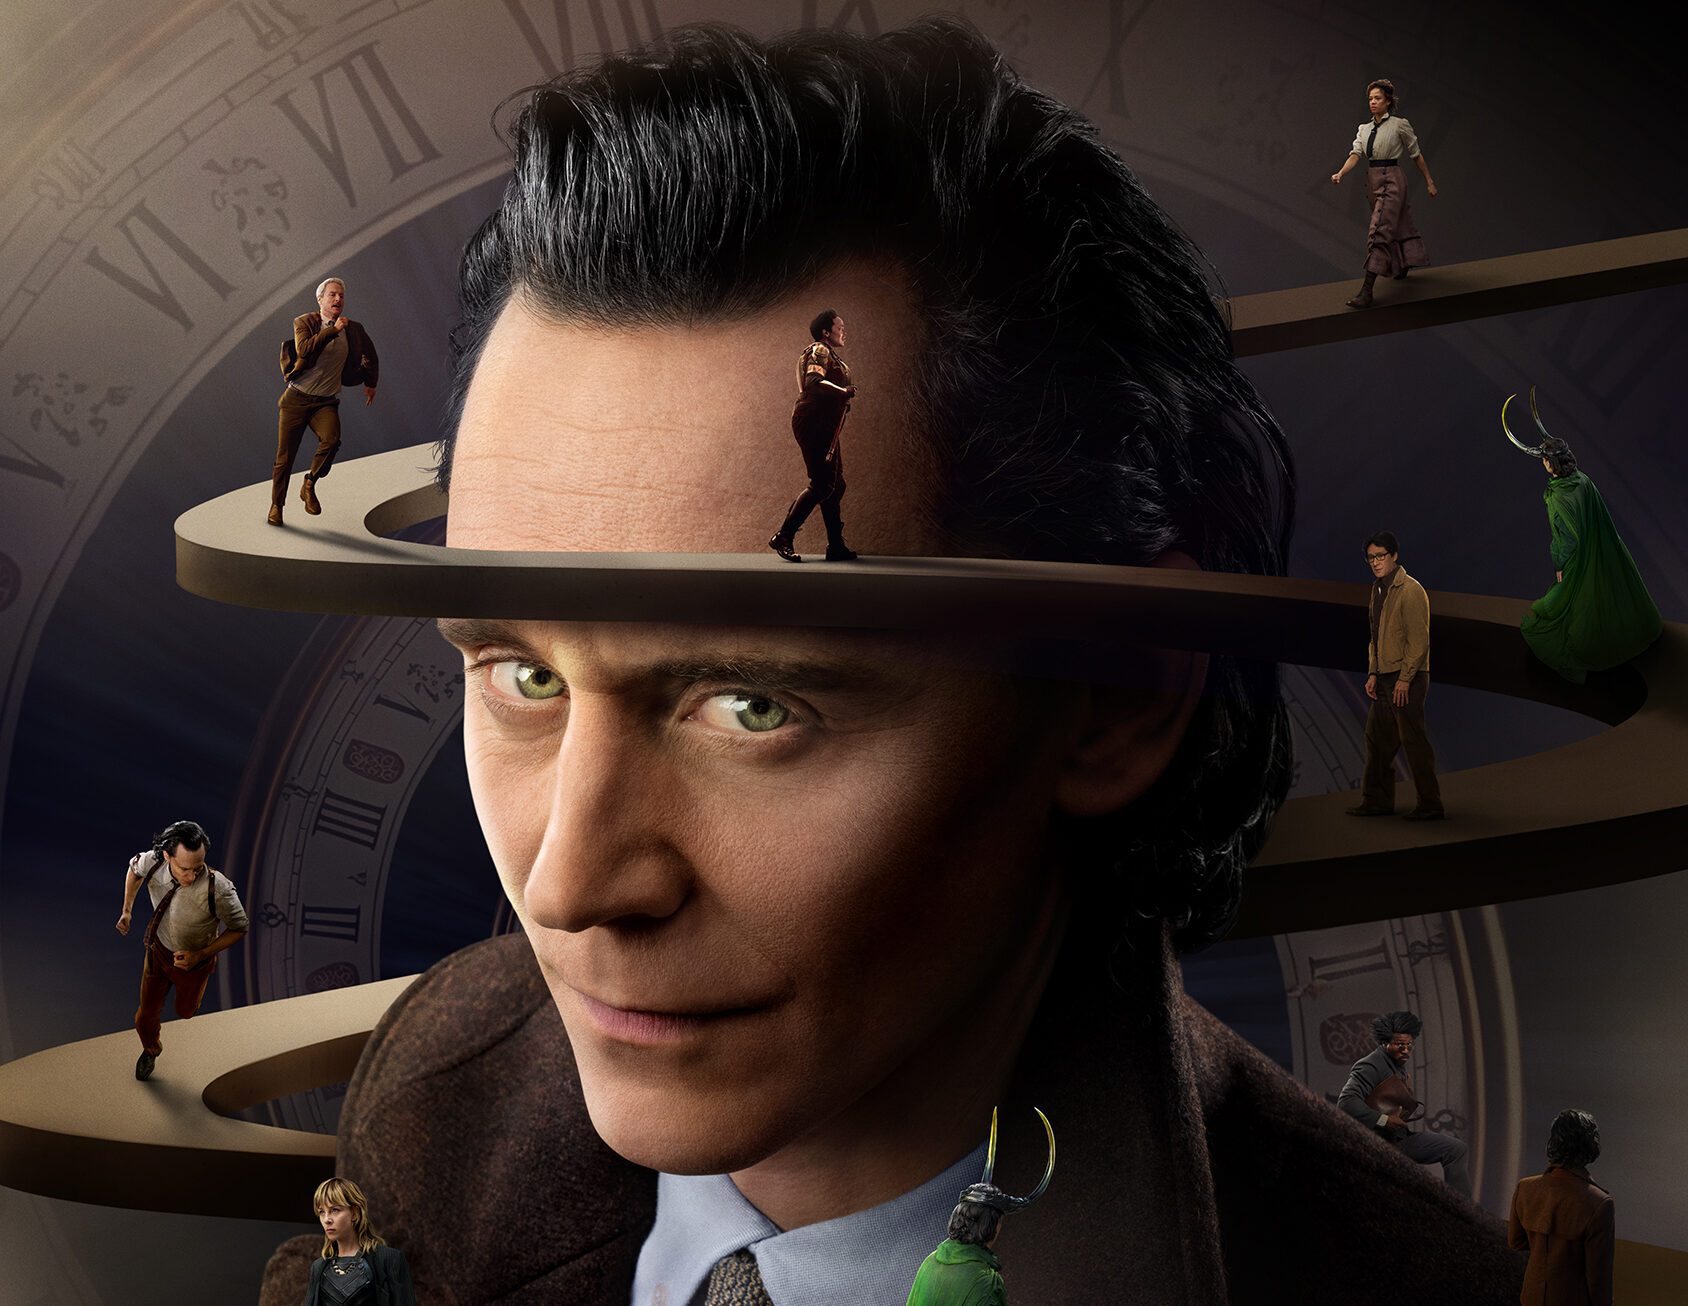 The Loki Season 2 Episode 1 and 2 runtimes have been revealed. Read on for more details on the latest Barside Buzz.